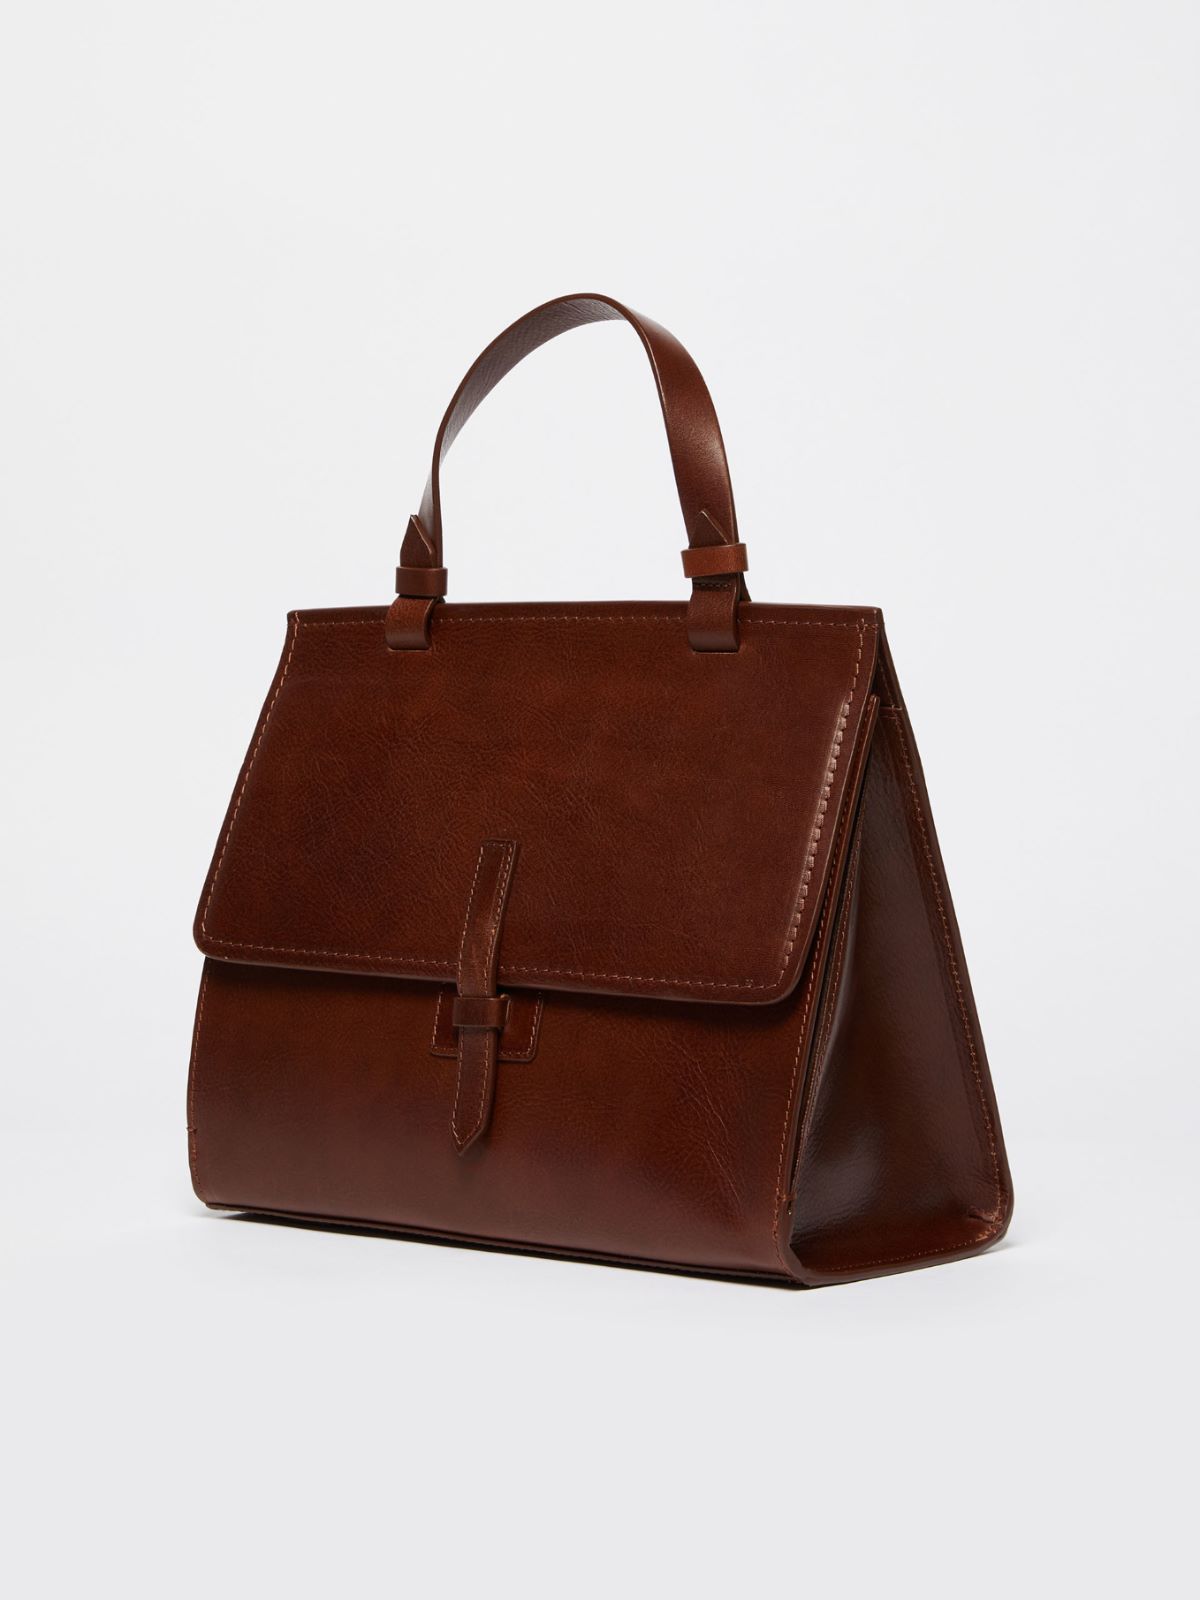 The Leather Satchel Co. Landscape Leather Tote Bag